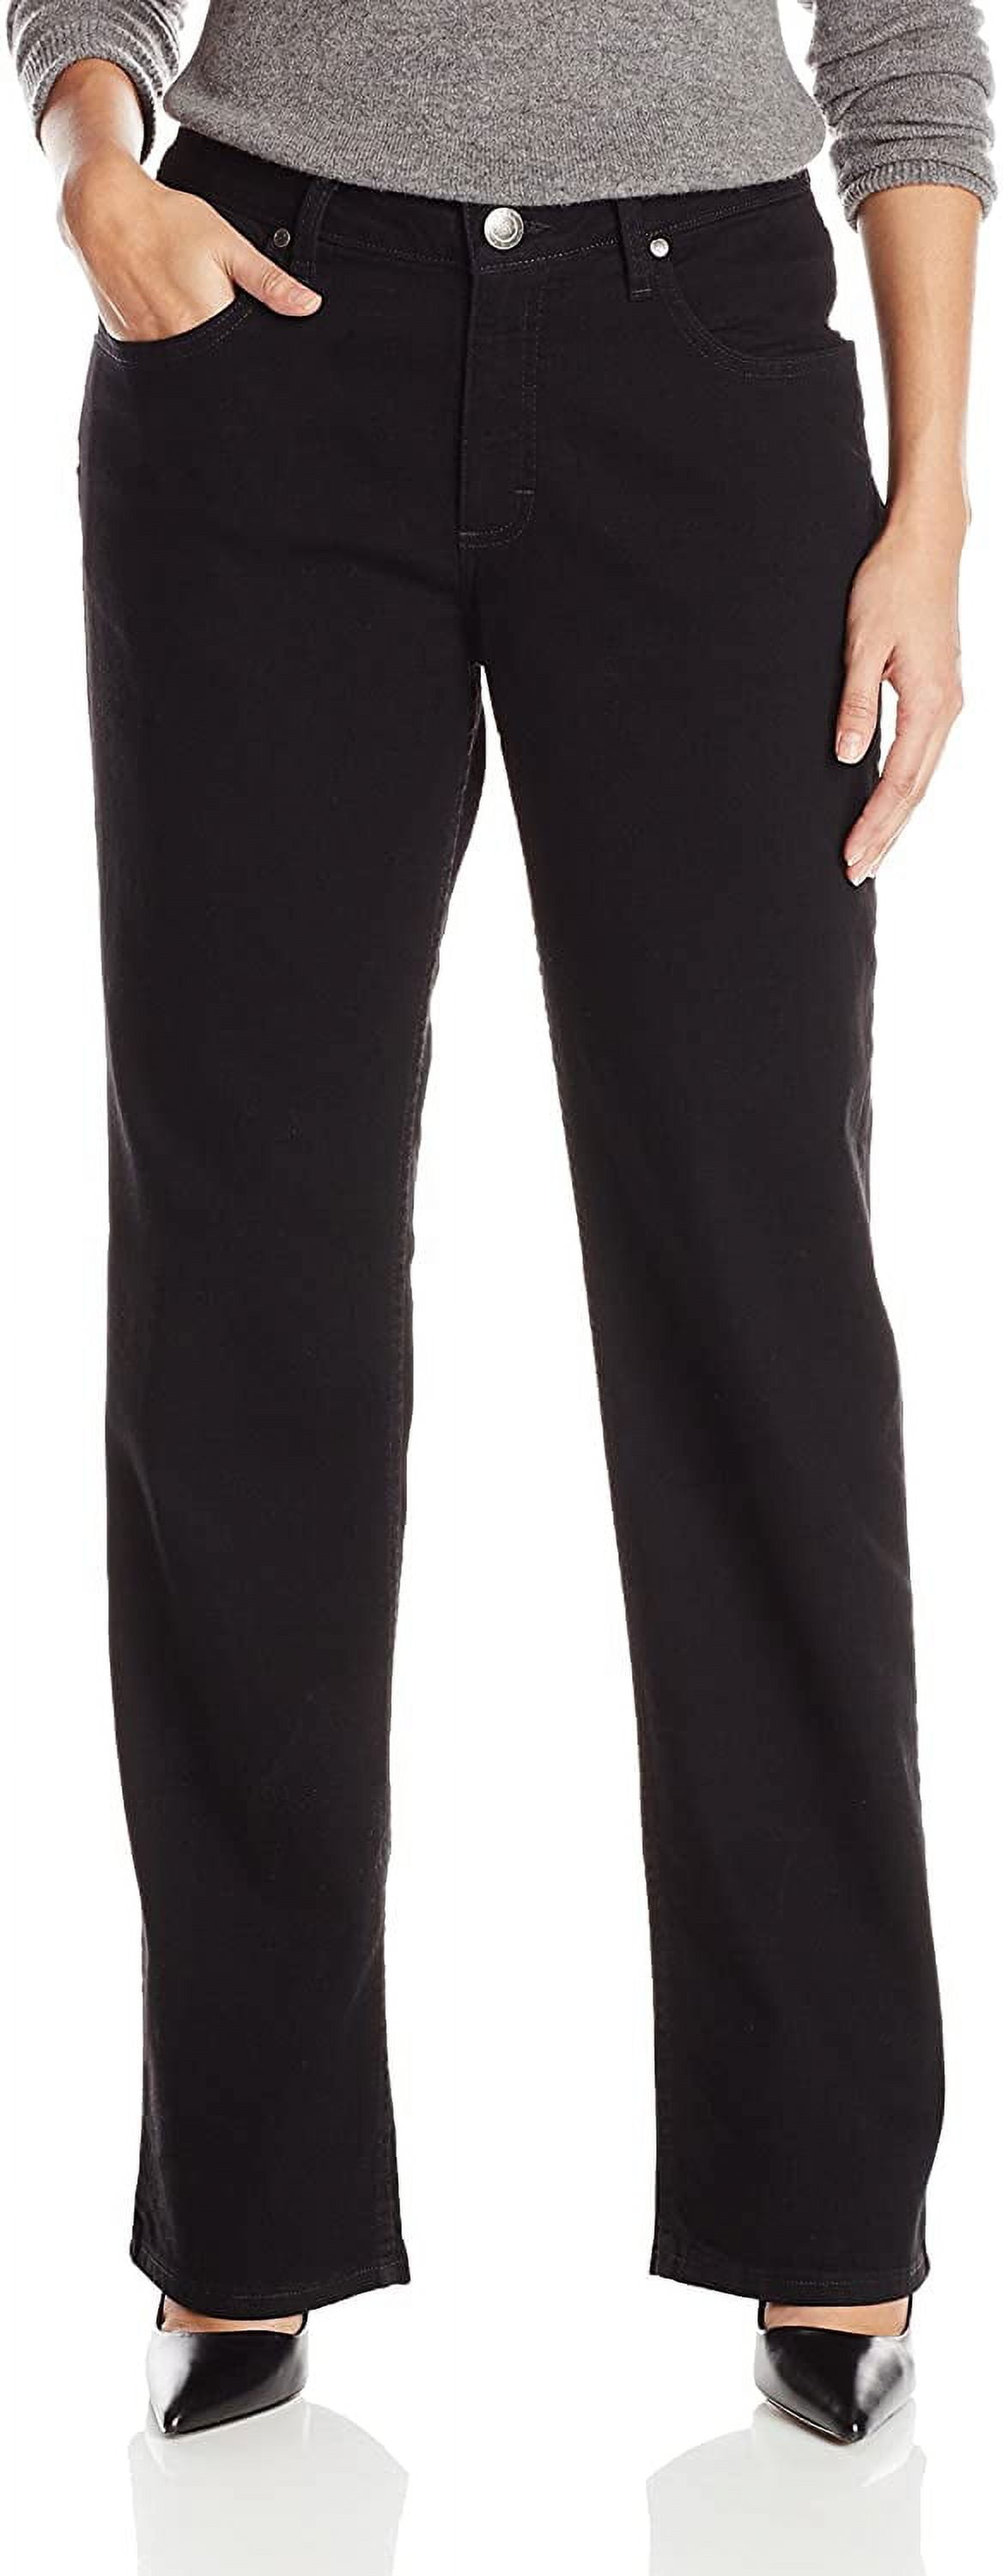 Riders by Lee Indigo Women's Relaxed Fit Straight Leg, Black, Size 8.0 ...